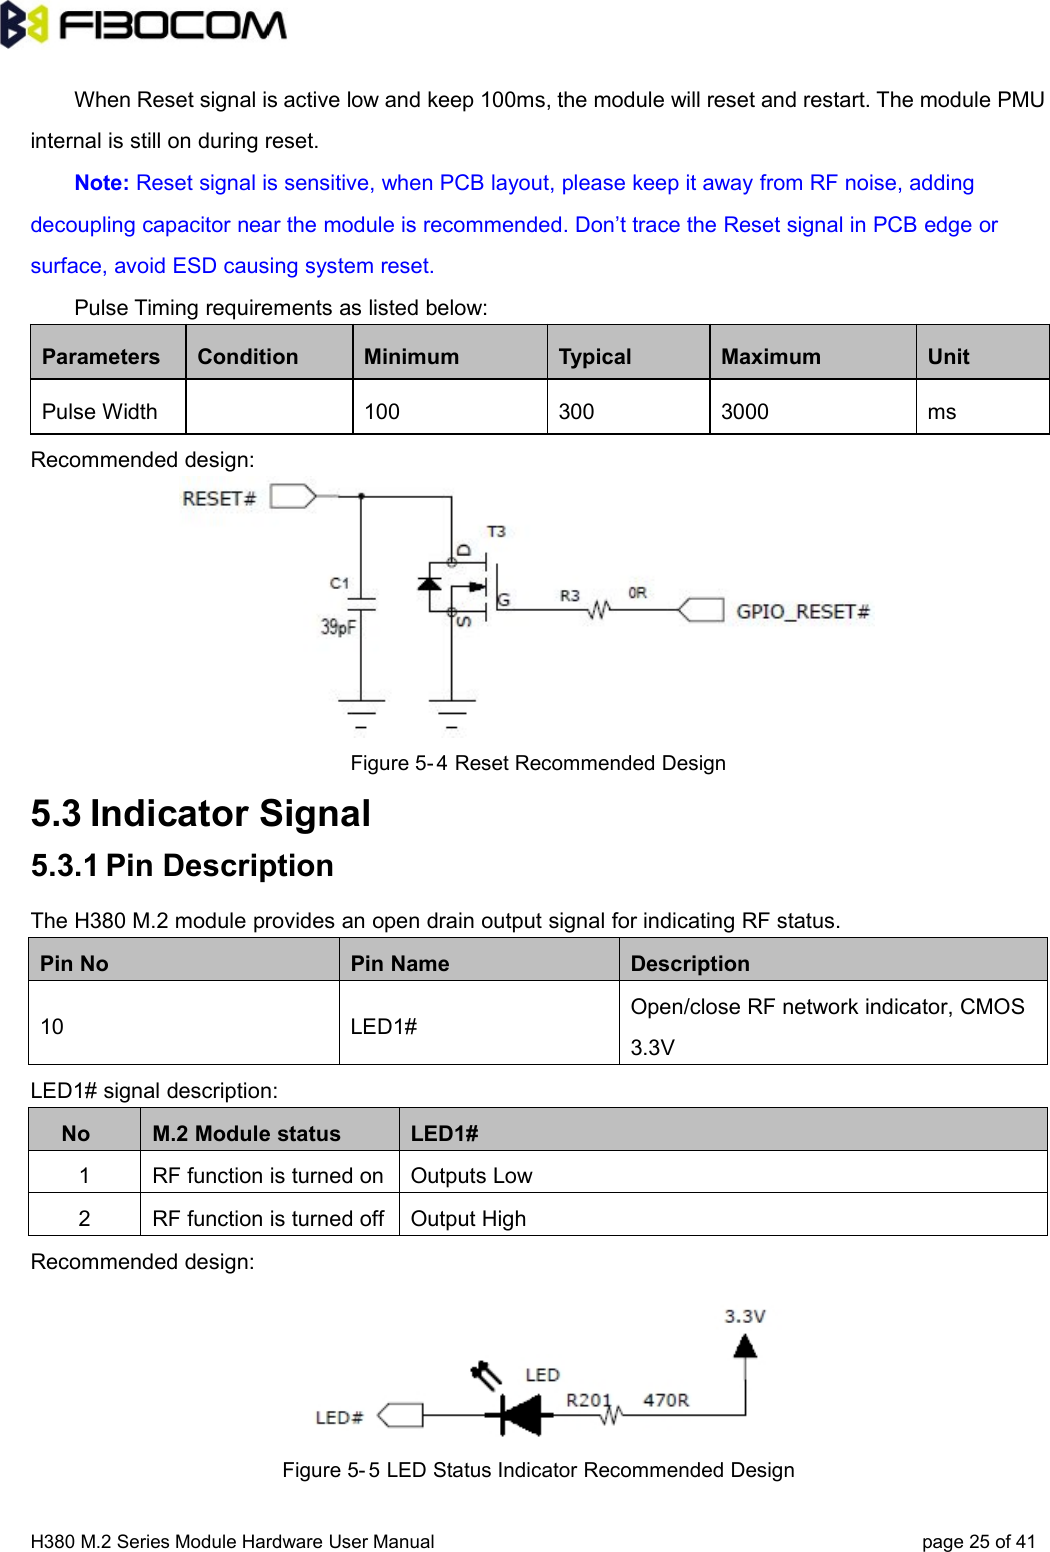 H380 M.2 Series Module Hardware User Manual page 25 of 41When Reset signal is active low and keep 100ms, the module will reset and restart. The module PMUinternal is still on during reset.Note: Reset signal is sensitive, when PCB layout, please keep it away from RF noise, addingdecoupling capacitor near the module is recommended. Don’t trace the Reset signal in PCB edge orsurface, avoid ESD causing system reset.Pulse Timing requirements as listed below:Parameters Condition Minimum Typical Maximum UnitPulse Width 100 300 3000 msRecommended design:Figure 5- 4 Reset Recommended Design5.3 Indicator Signal5.3.1 Pin DescriptionThe H380 M.2 module provides an open drain output signal for indicating RF status.Pin No Pin Name Description10 LED1#Open/close RF network indicator, CMOS3.3VLED1# signal description:No M.2 Module status LED1#1 RF function is turned on Outputs Low2 RF function is turned off Output HighRecommended design:Figure 5- 5 LED Status Indicator Recommended Design